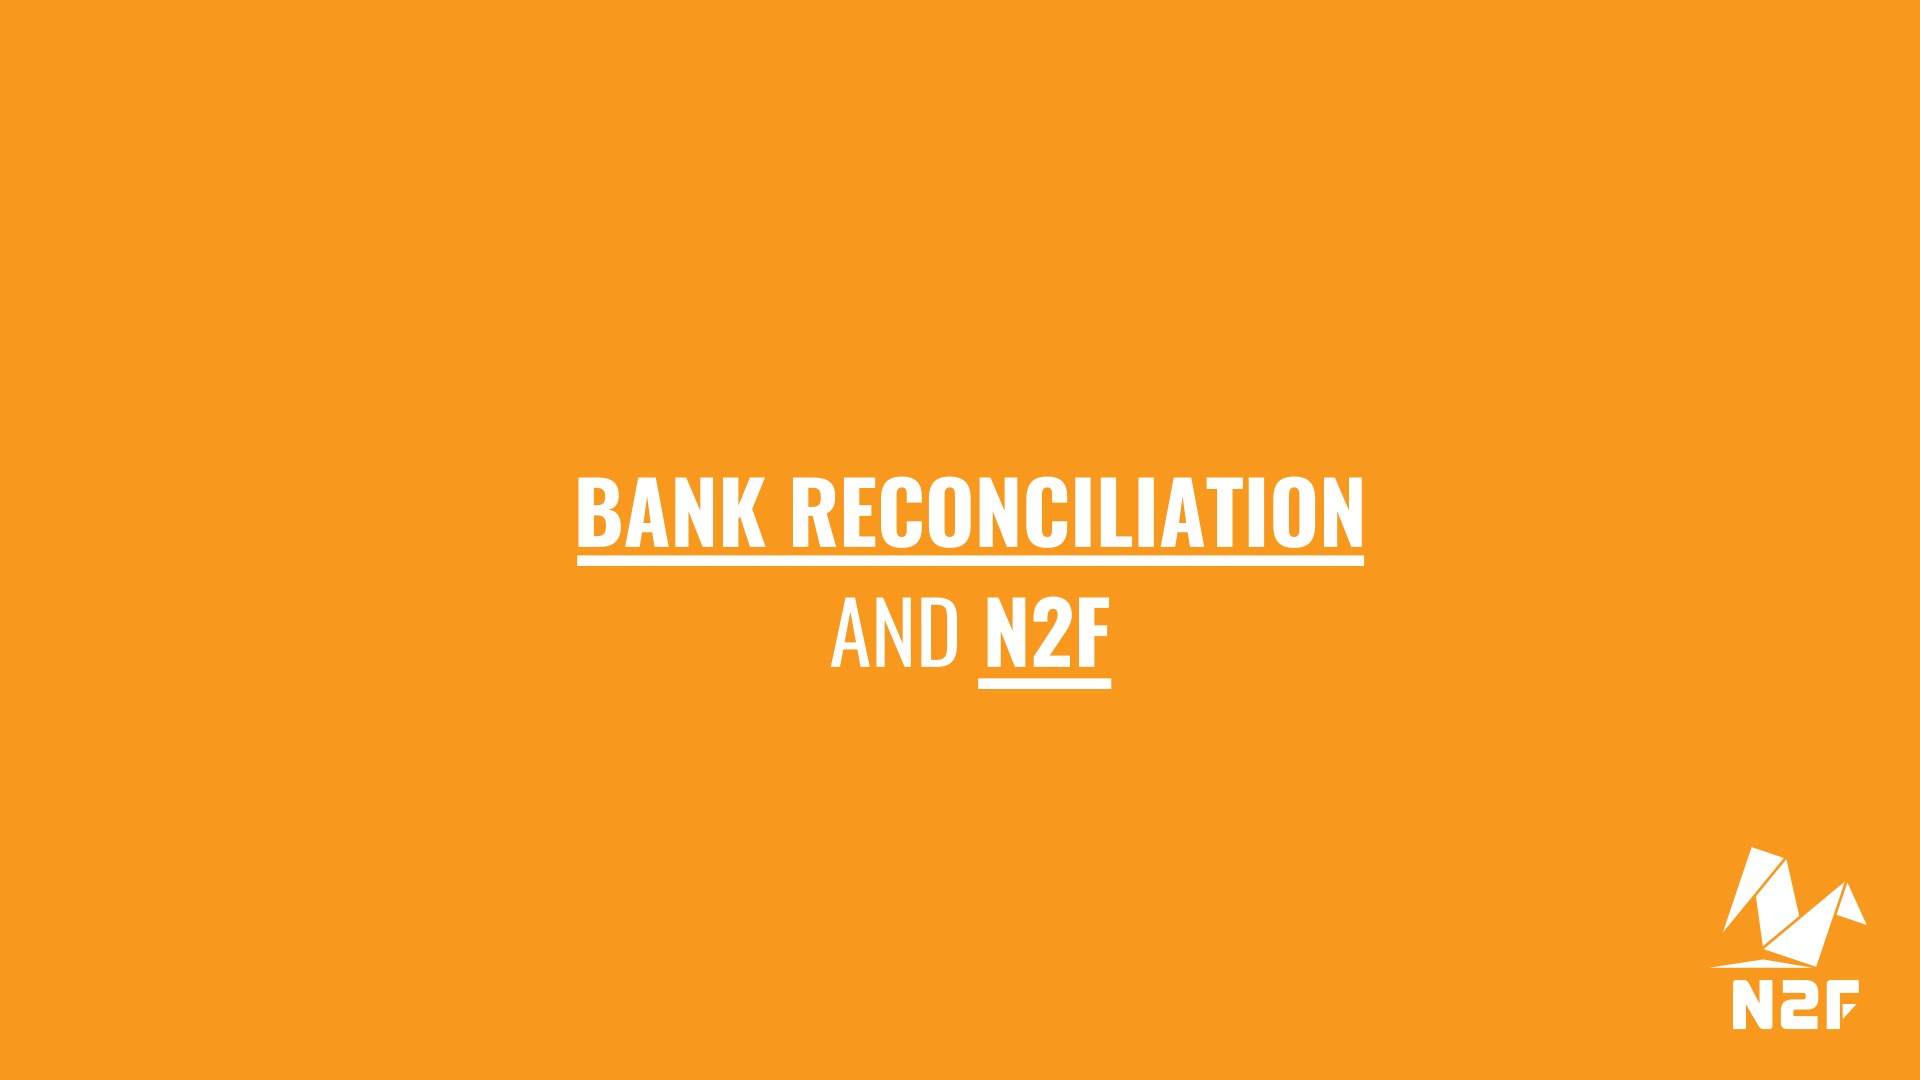 The bank reconciliation and N2F